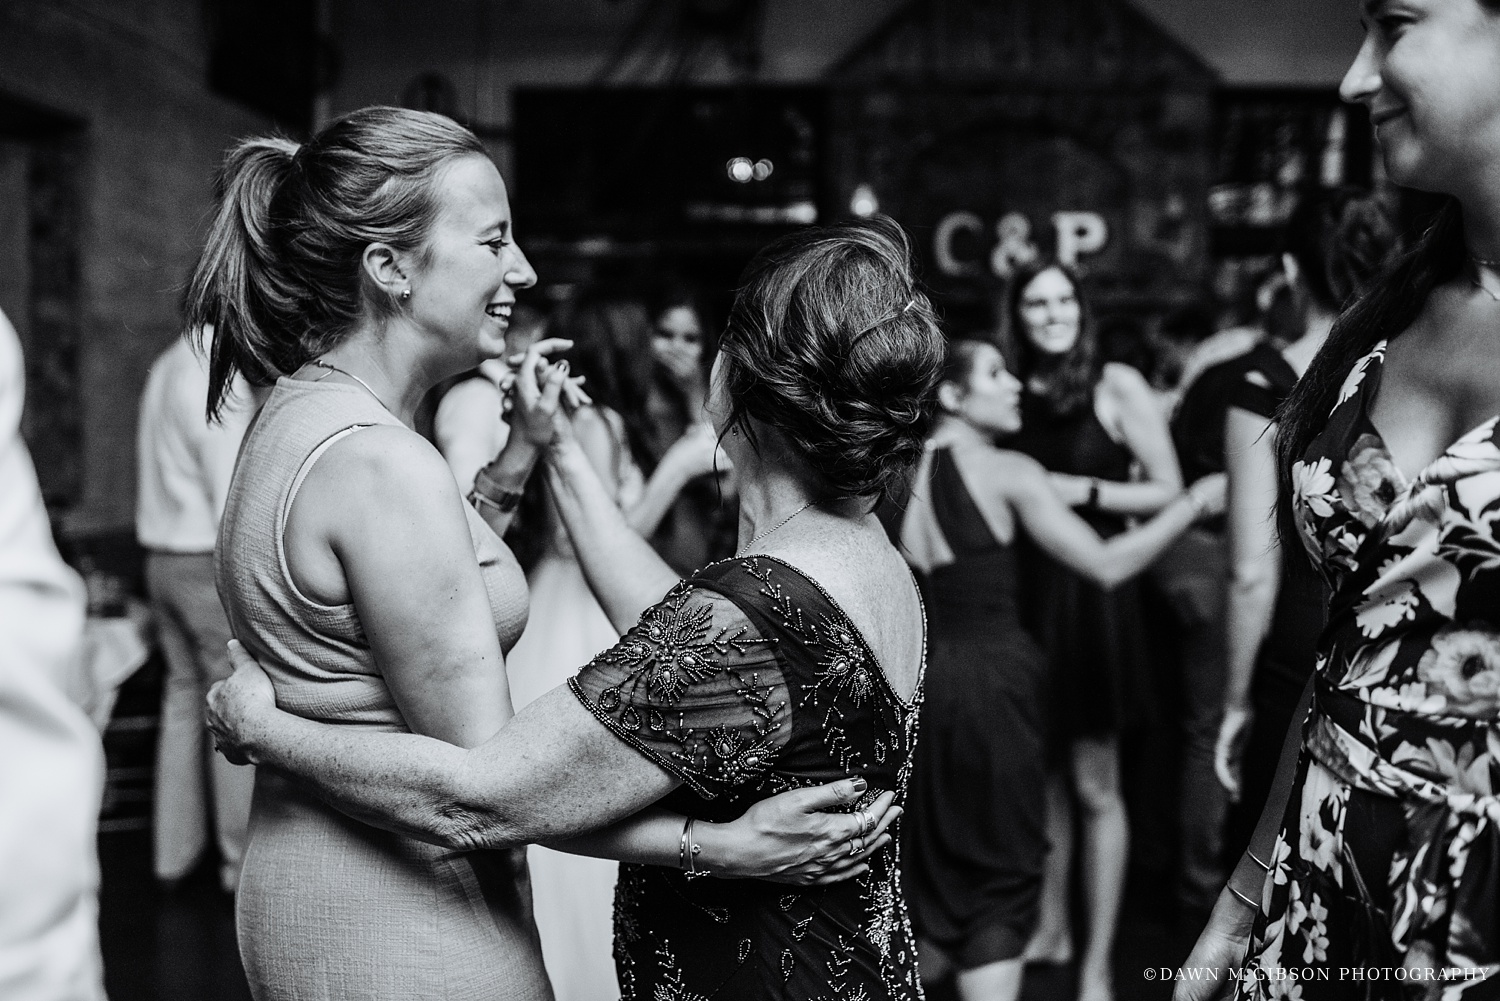 Carly + Paul's Wedding at The Sinclair of Skaneateles